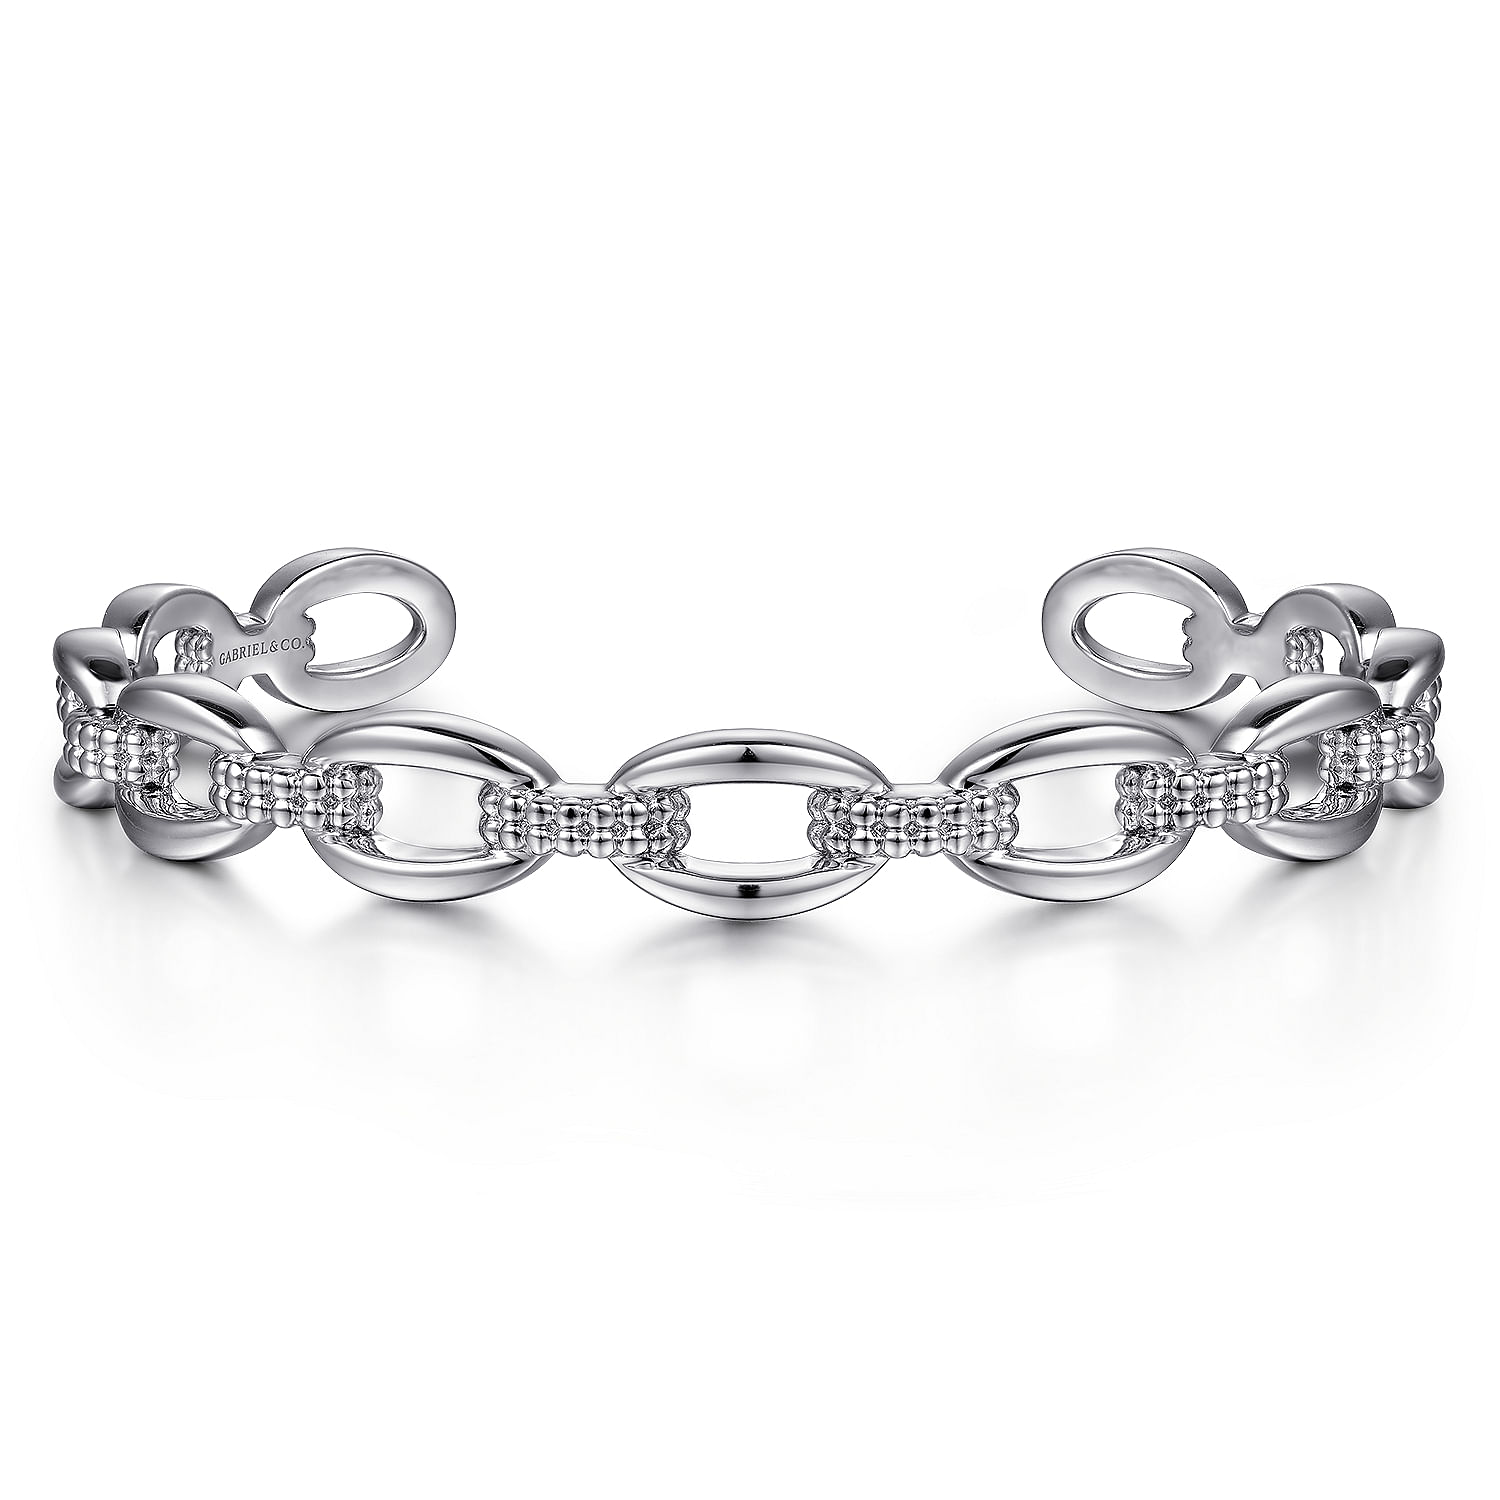 Sterling Silver Oval Link Cuff Bangle